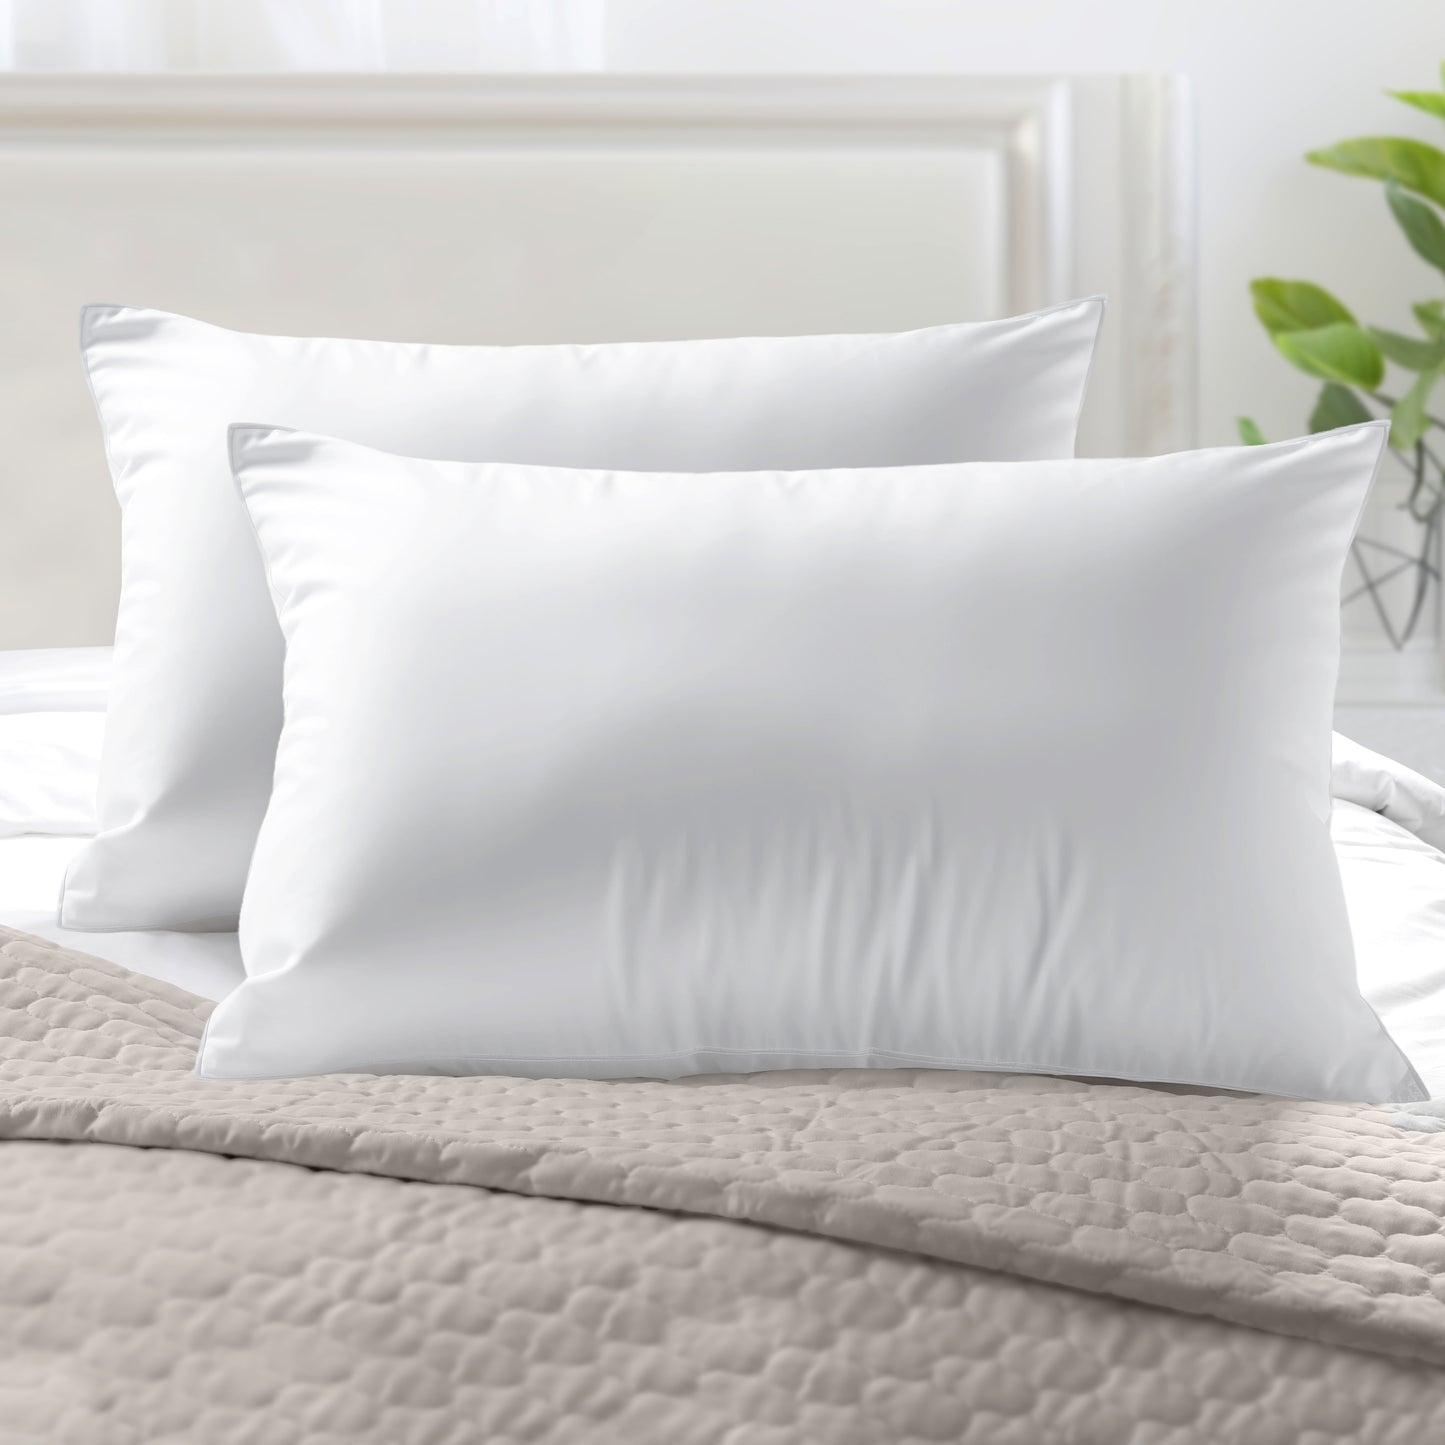 Elegant Comfort Retreat Solid Cotton Shell Hotel Pillows, Gel-Infused Filling - Set of 2